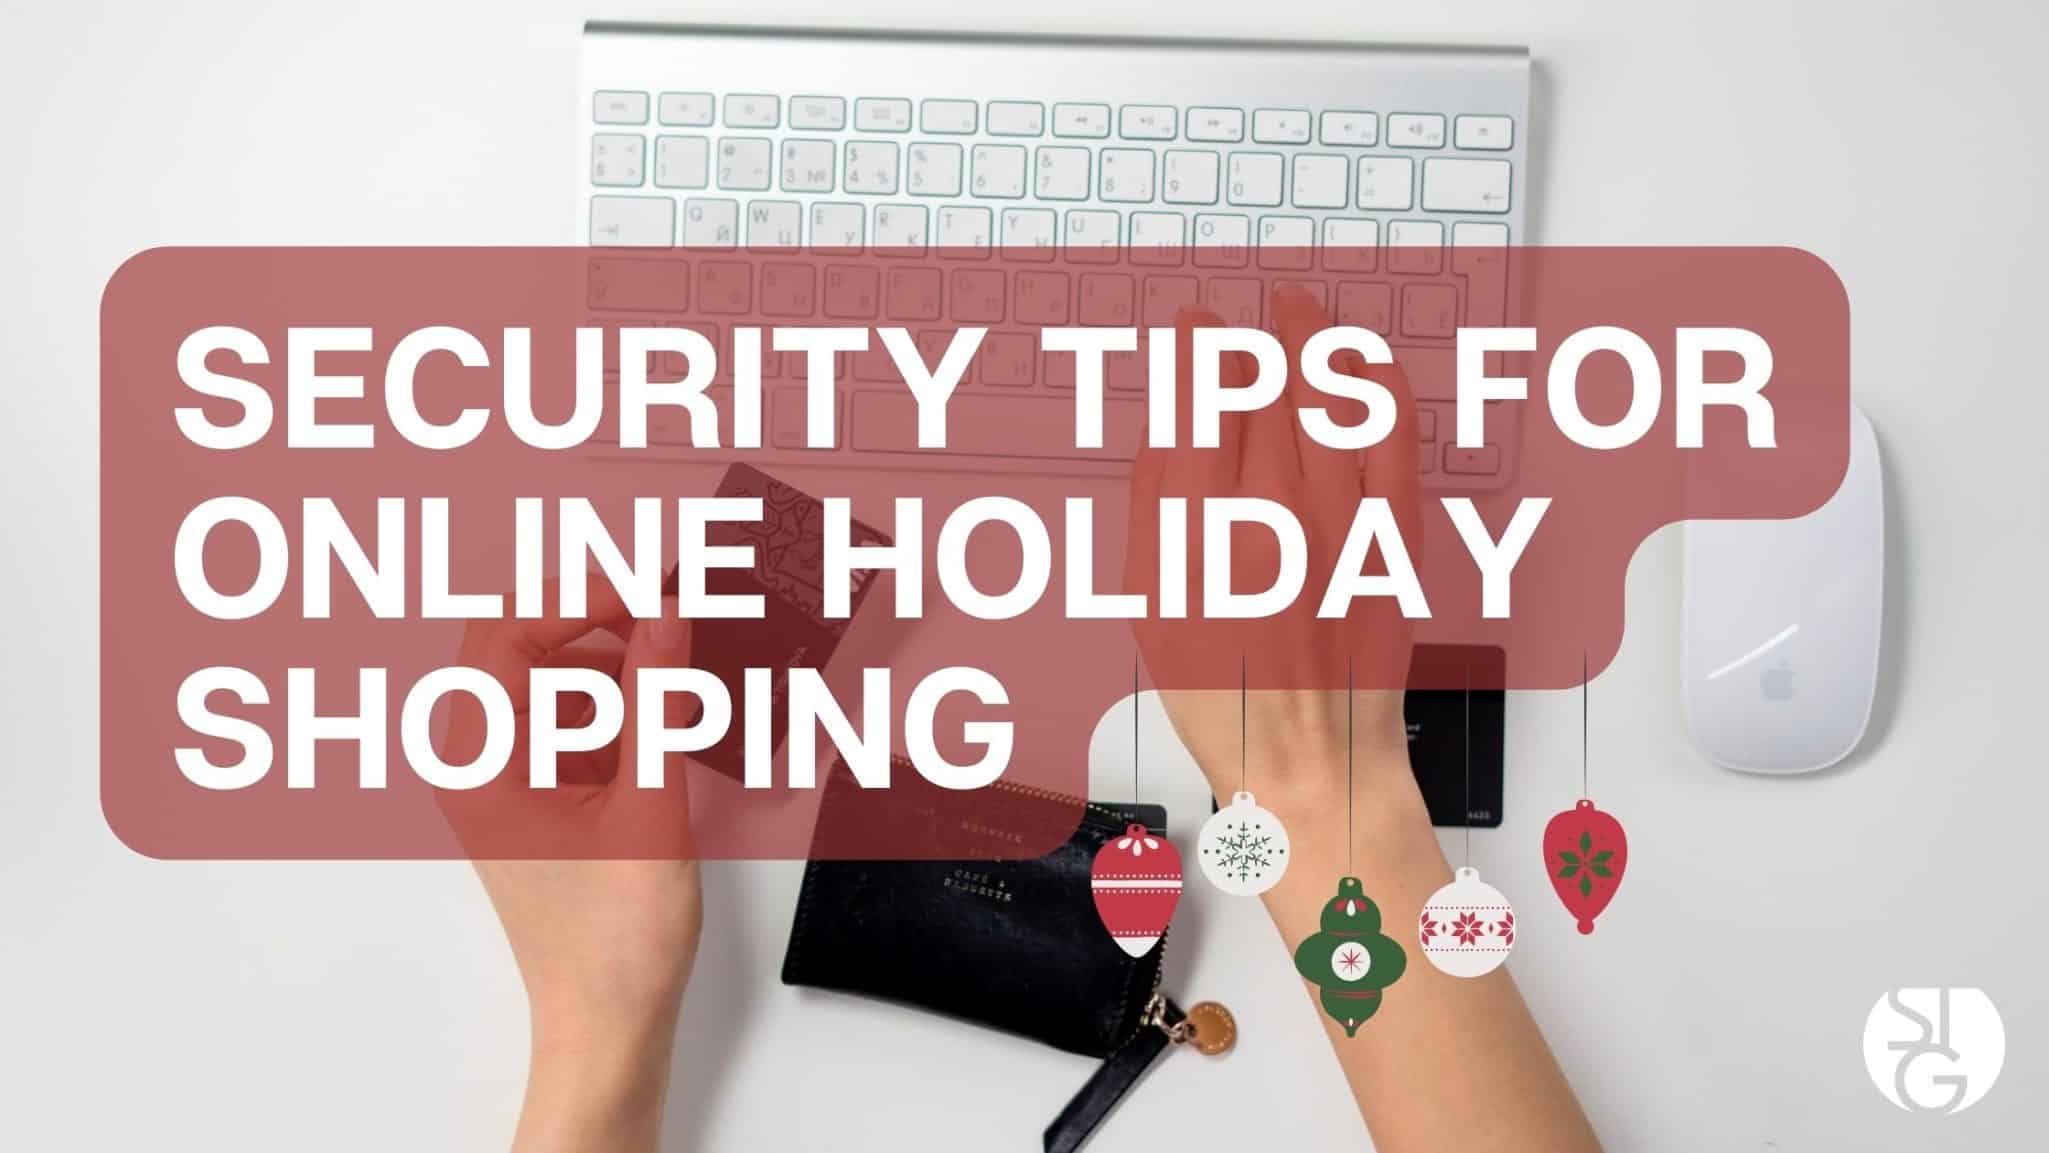 Critical Security Tips for Online Holiday Shopping